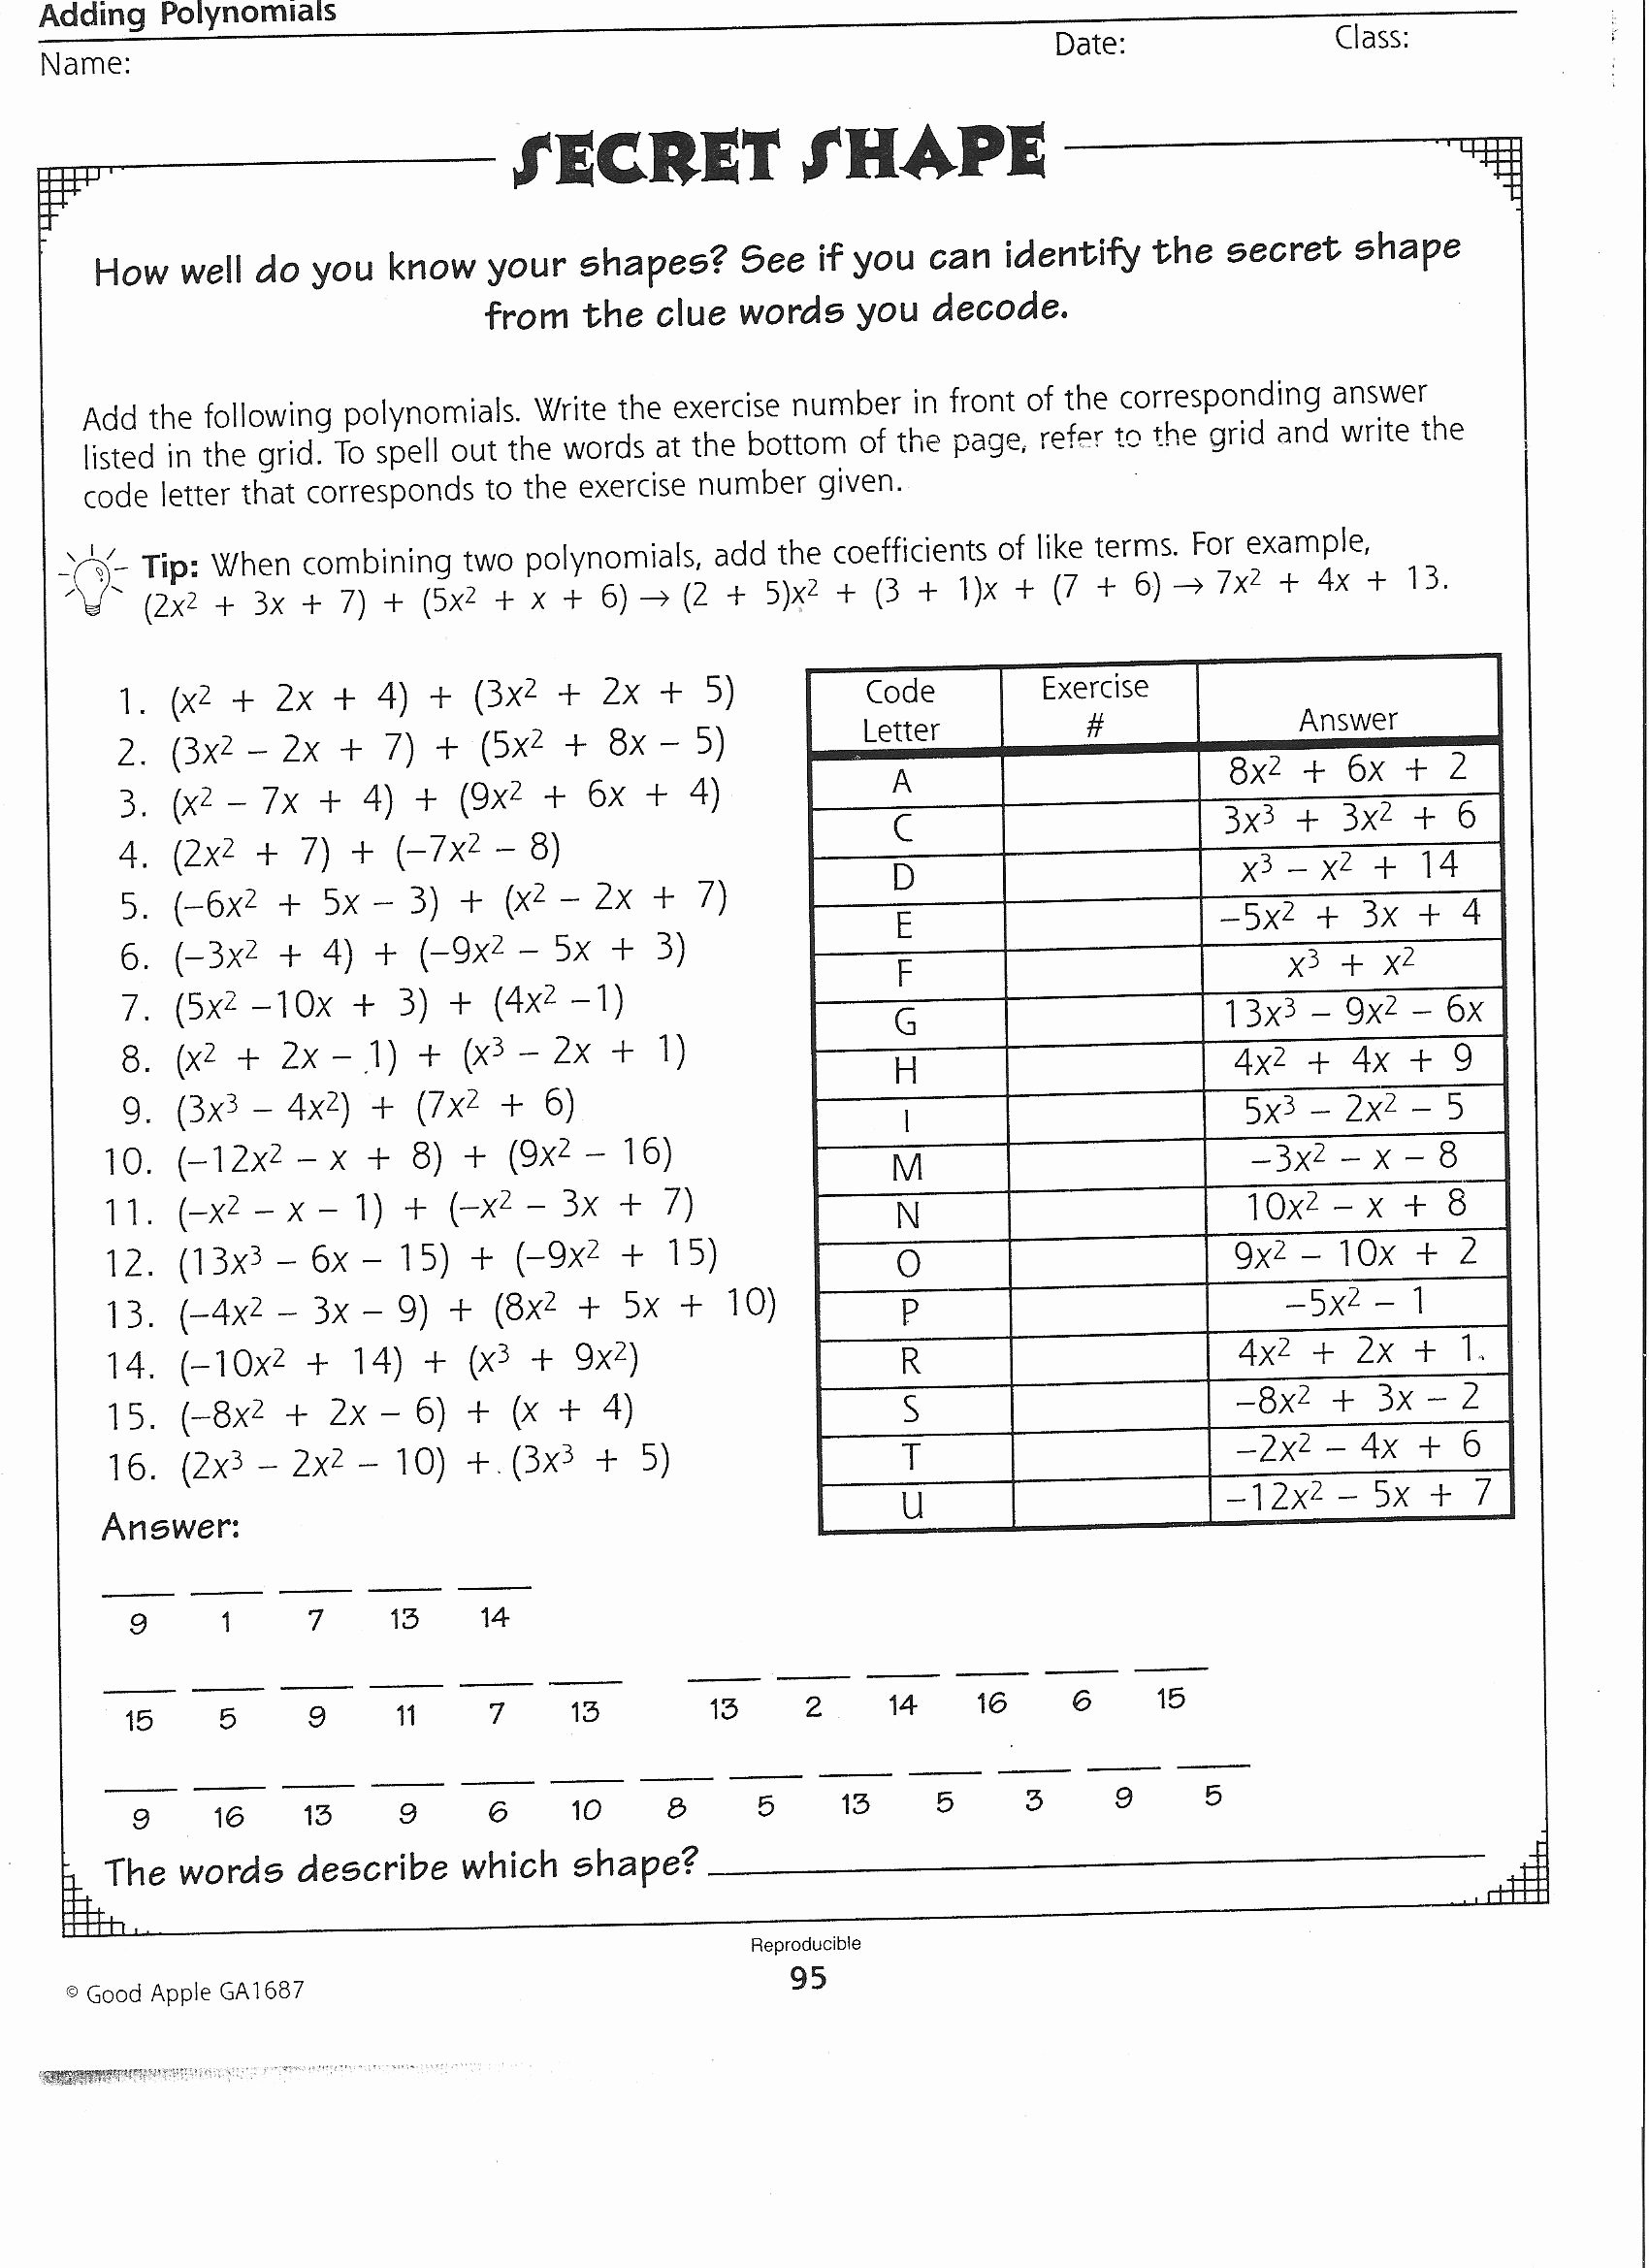 Adding and Subtracting Polynomials Worksheet Best Of Alex